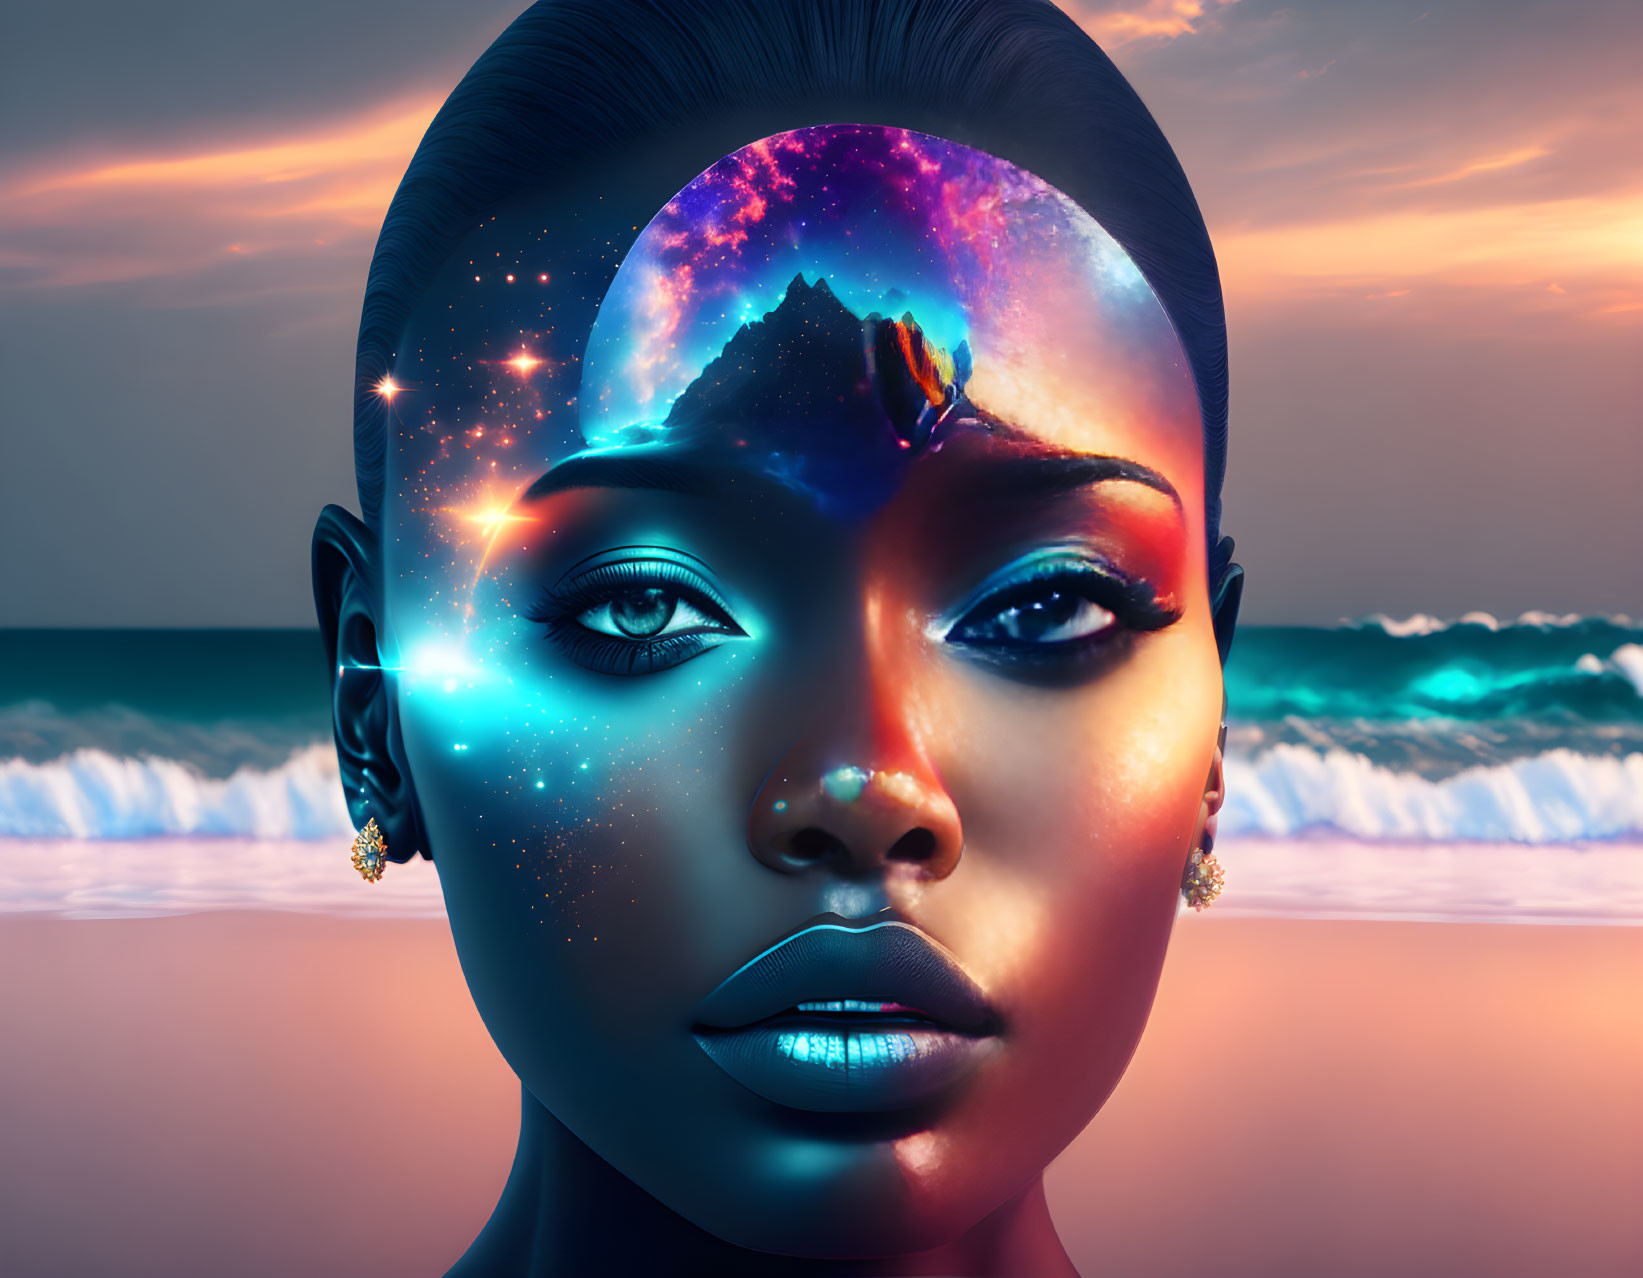 Cosmic-themed woman portrait with ocean sunset backdrop